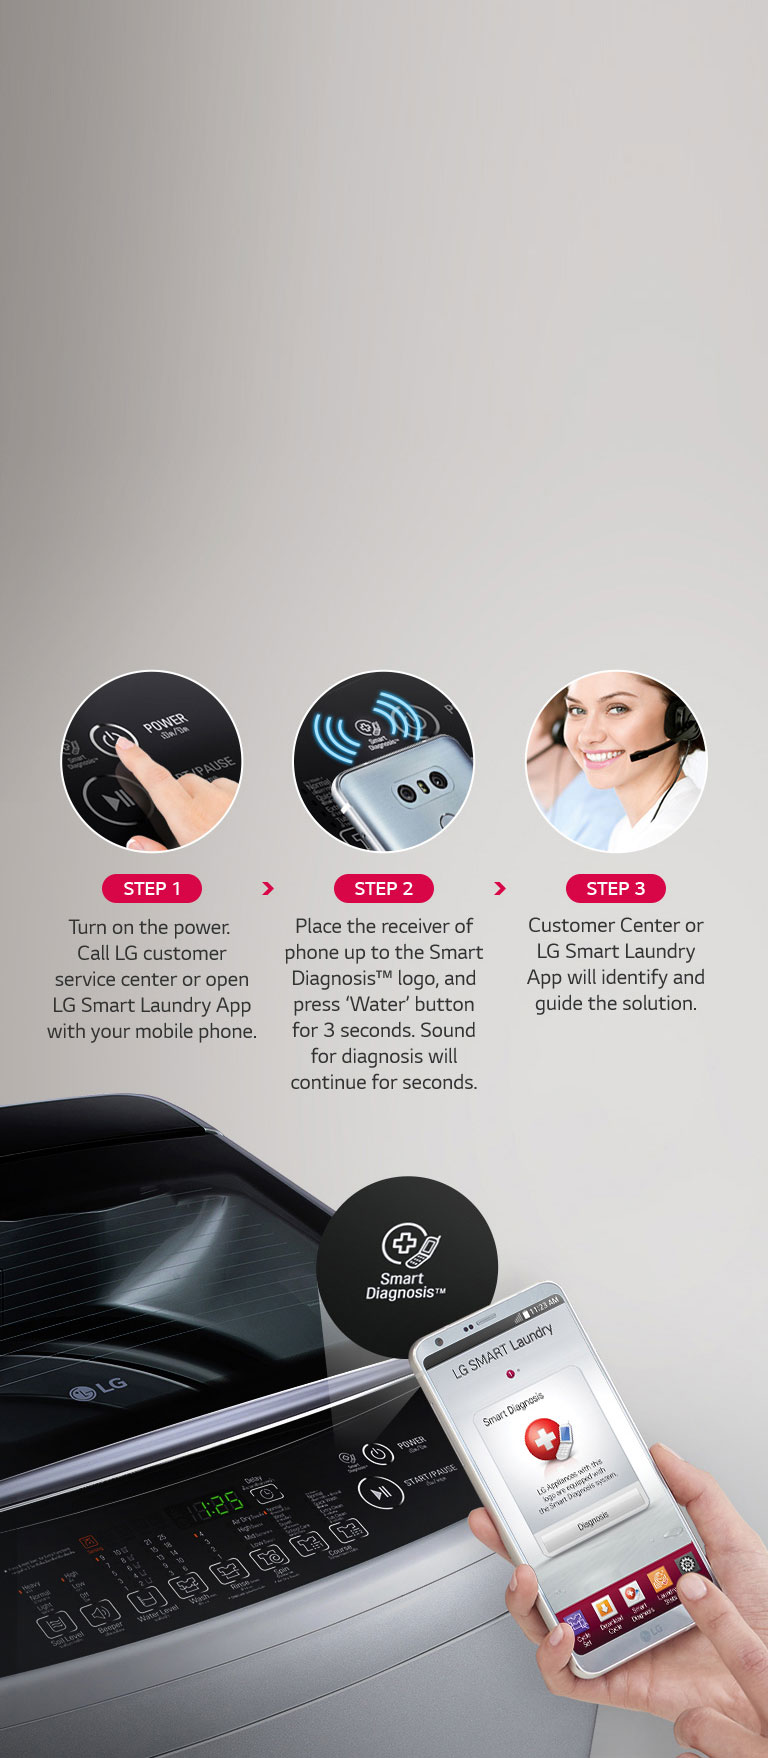 Image shows the steps to using the LG Smart Diagnosis™ app on mobile phone to get help from LG Customer Center